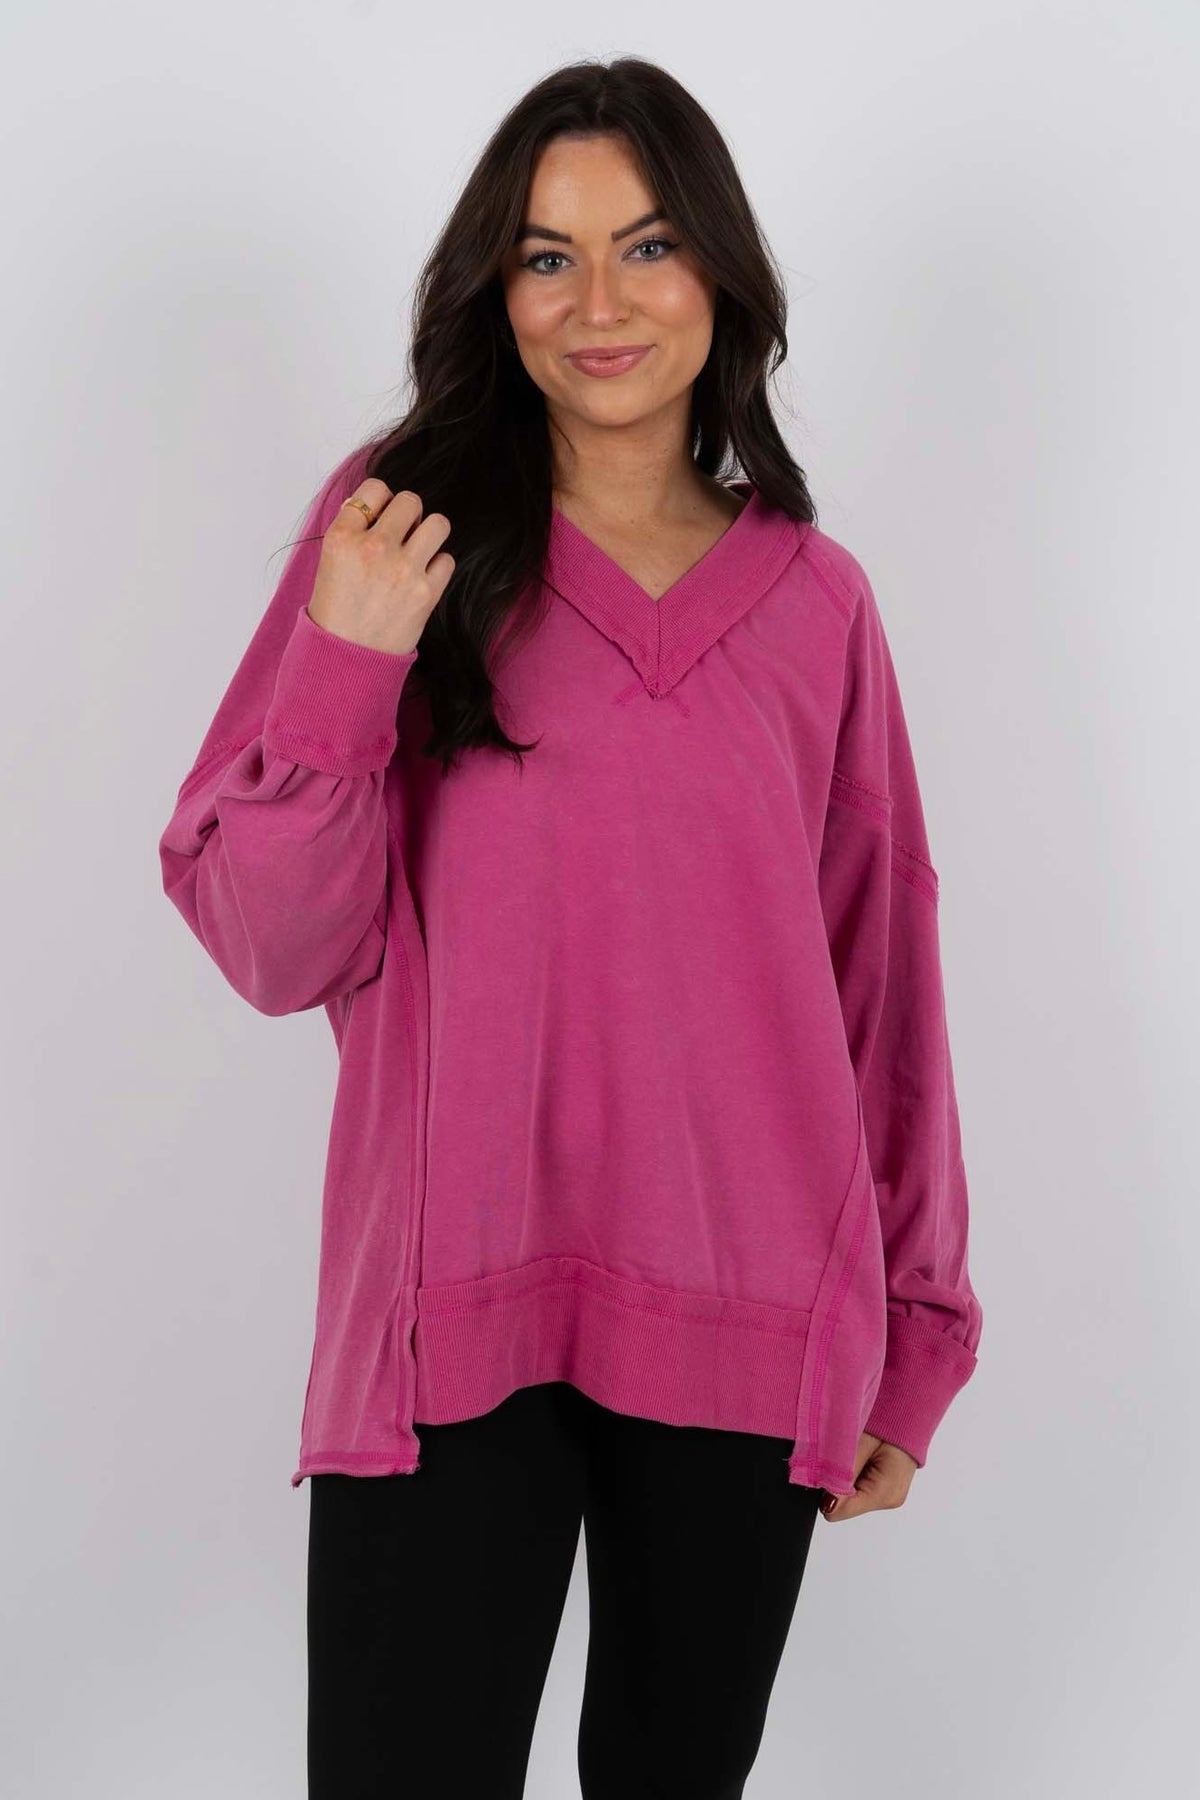 Without A Trace Top (Magenta)